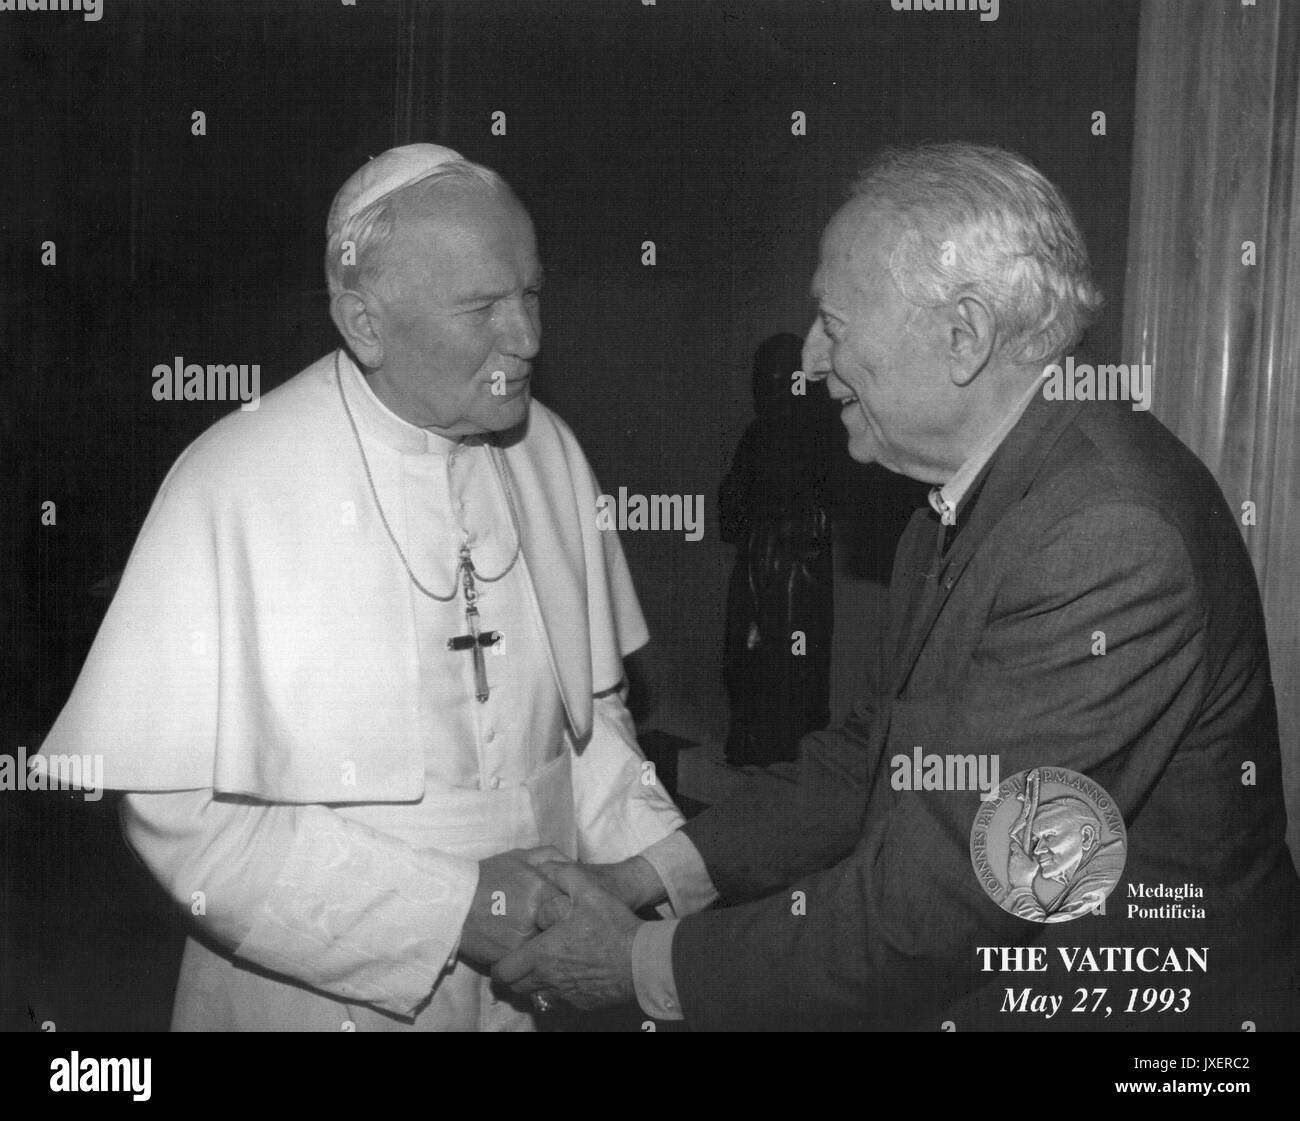 Benjamin Theodore Rome, Candid photograph, Meeting with Pope John Paul II at The Vatican, 1993. Stock Photo